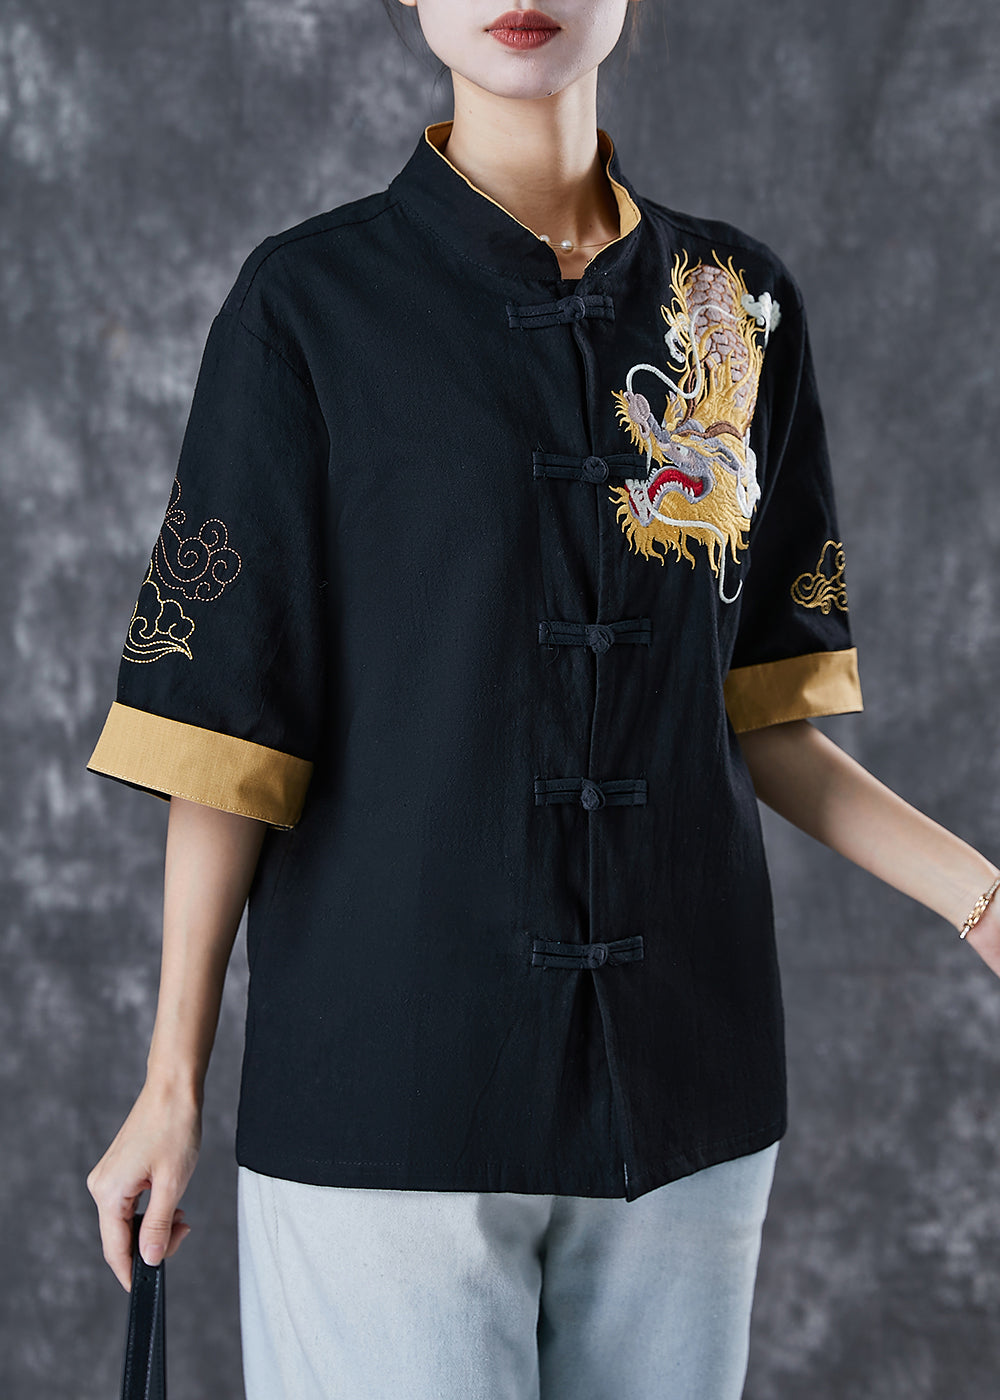 Black Linen Top Embroideried Chinese Button Short Sleeve